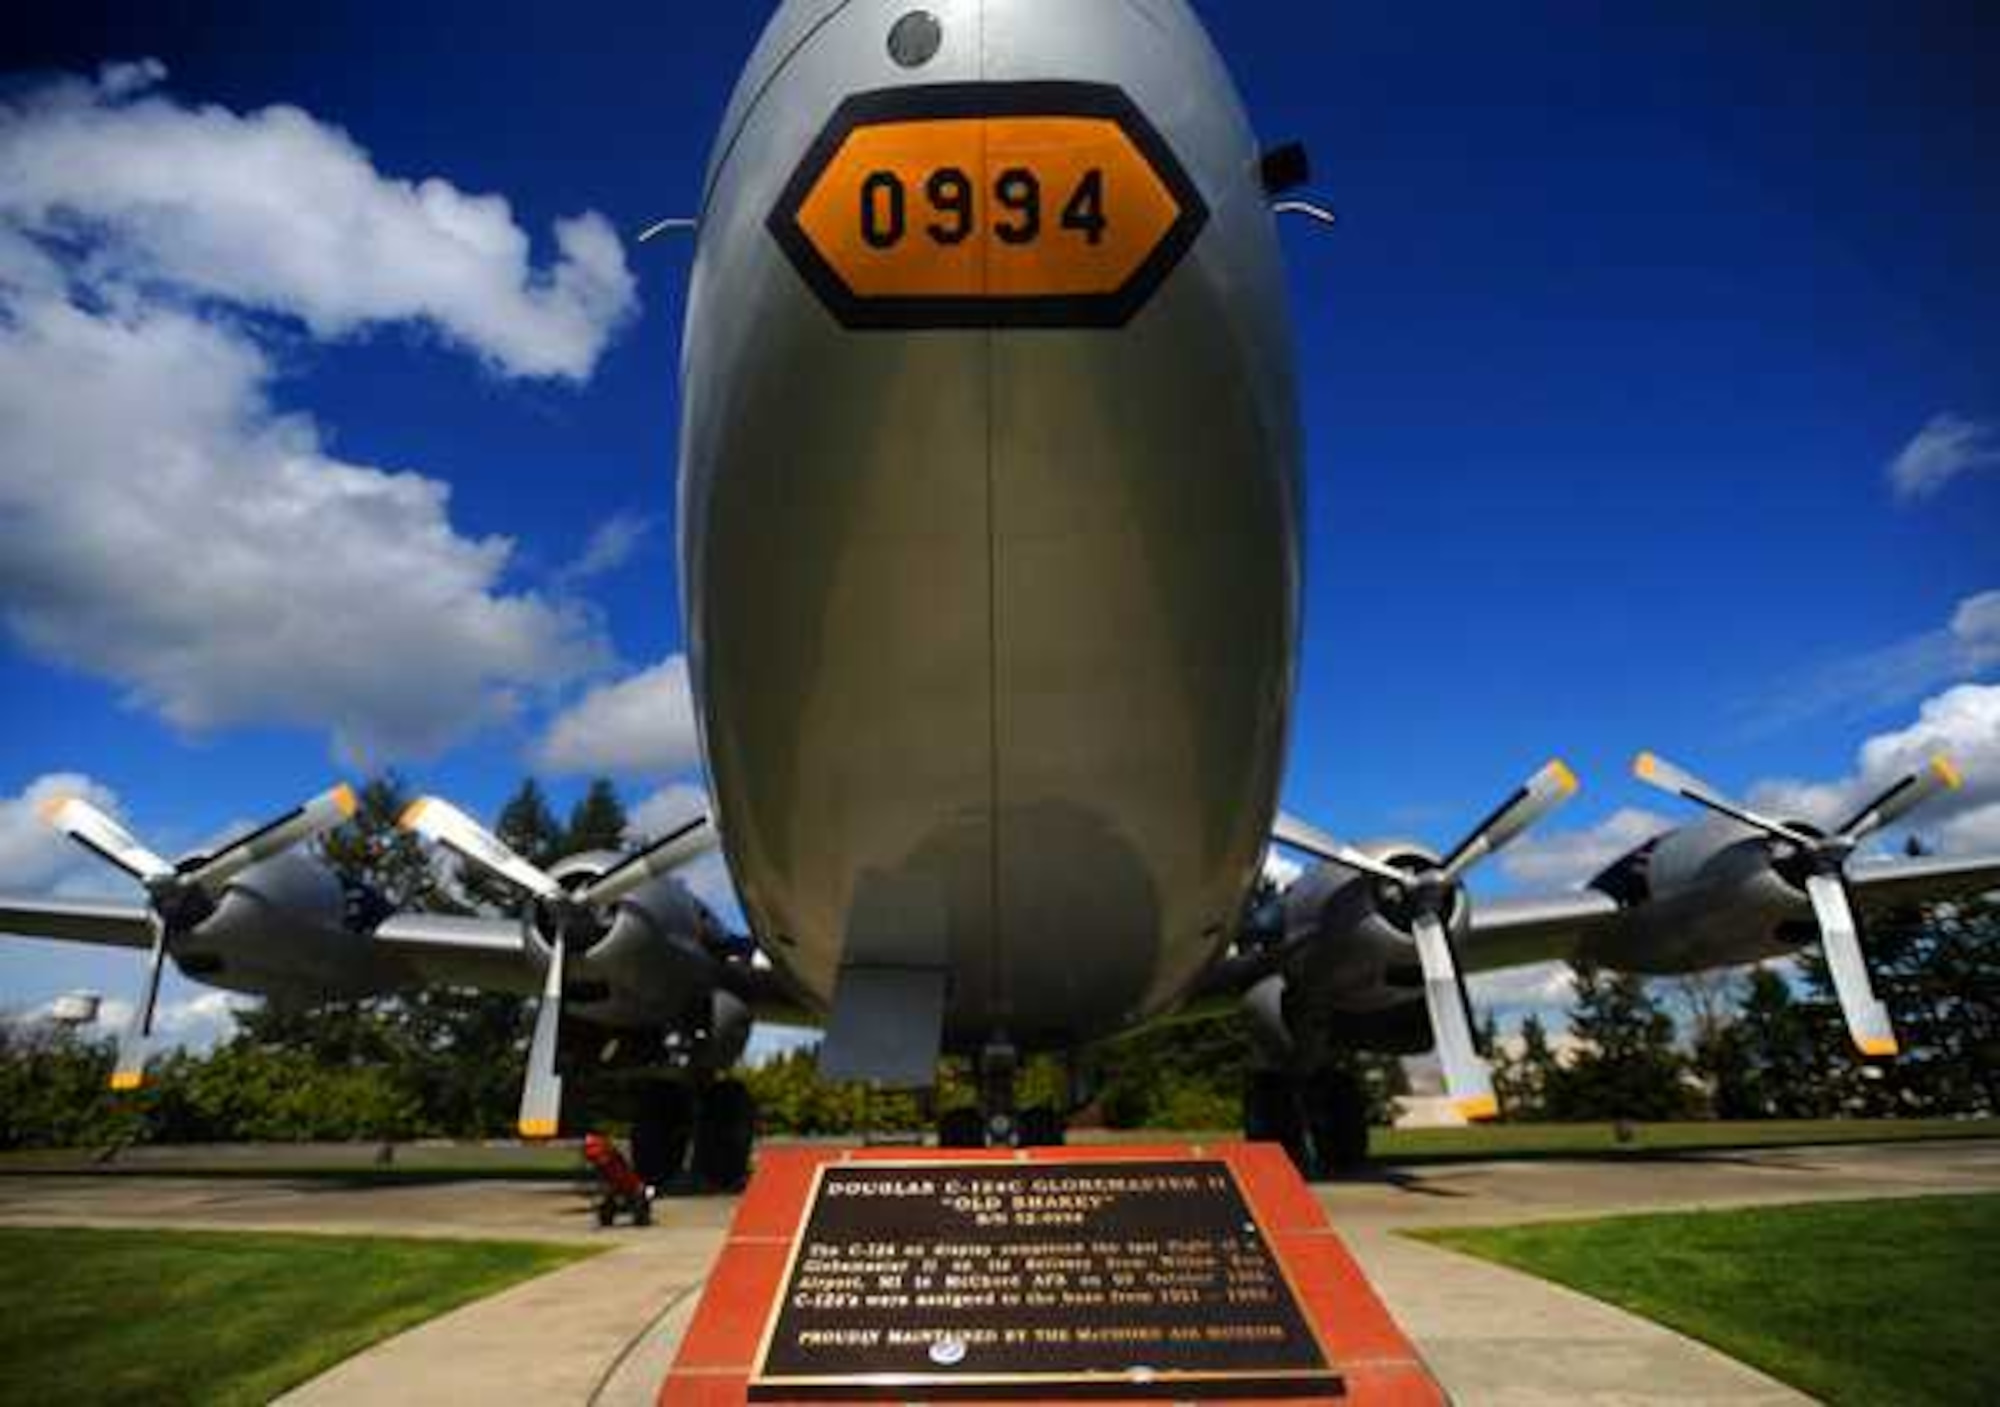 Douglas C-124C Globemaster II airplanes flew out of McChord Air Force Base from 1951 to 1969. They are now on display at Heritage Hill at McChord Field, Joint Base Lewis-McChord, Wash. (U.S. Air Force photo/Ingrid Barrentine)